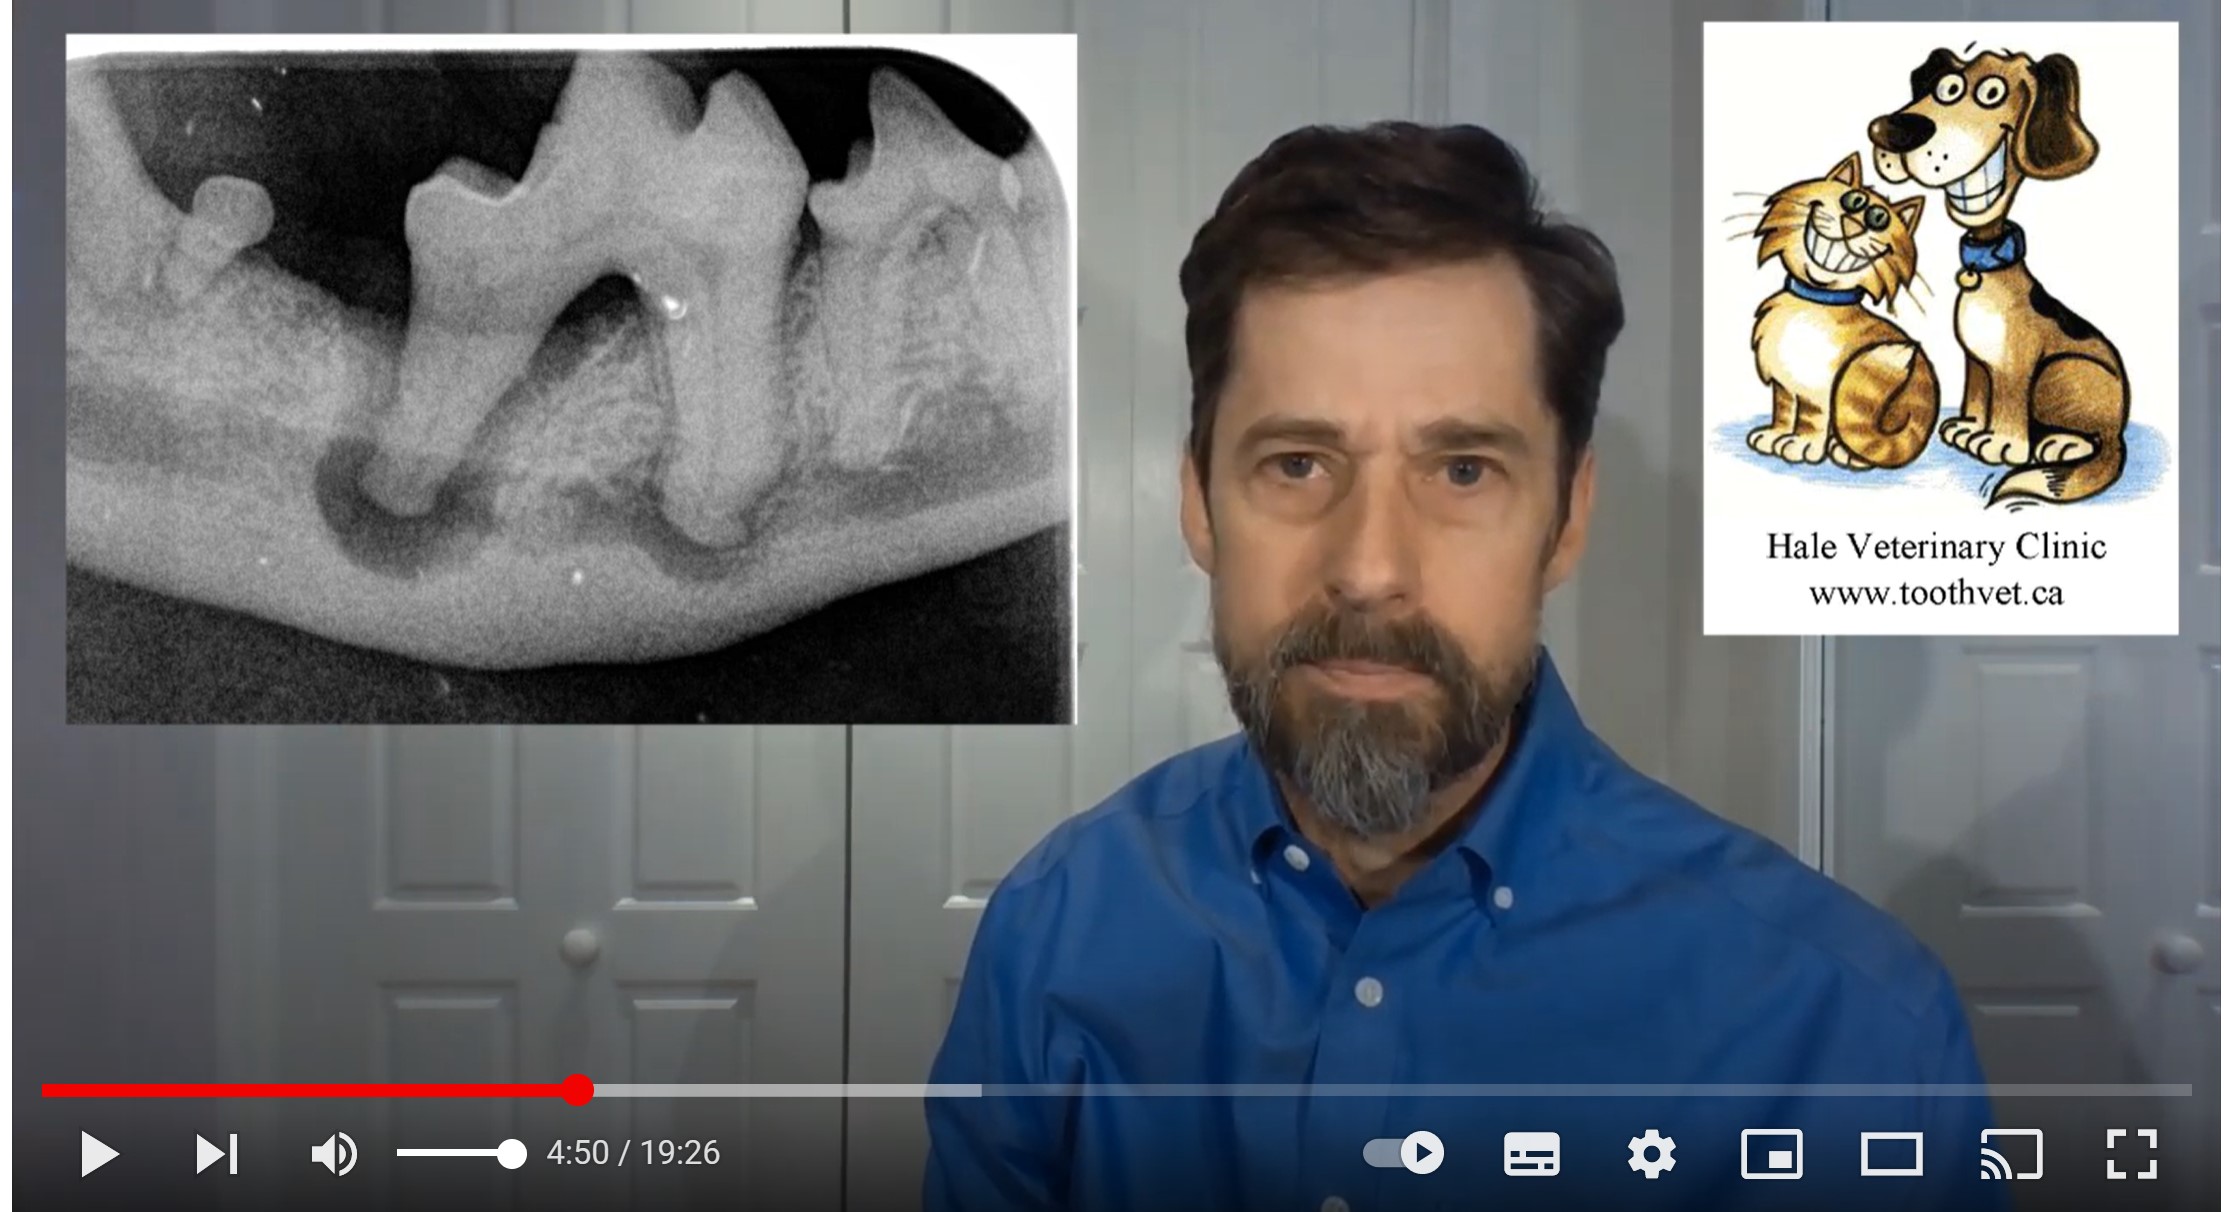 My Video on Anesthesia-Free Dentistry